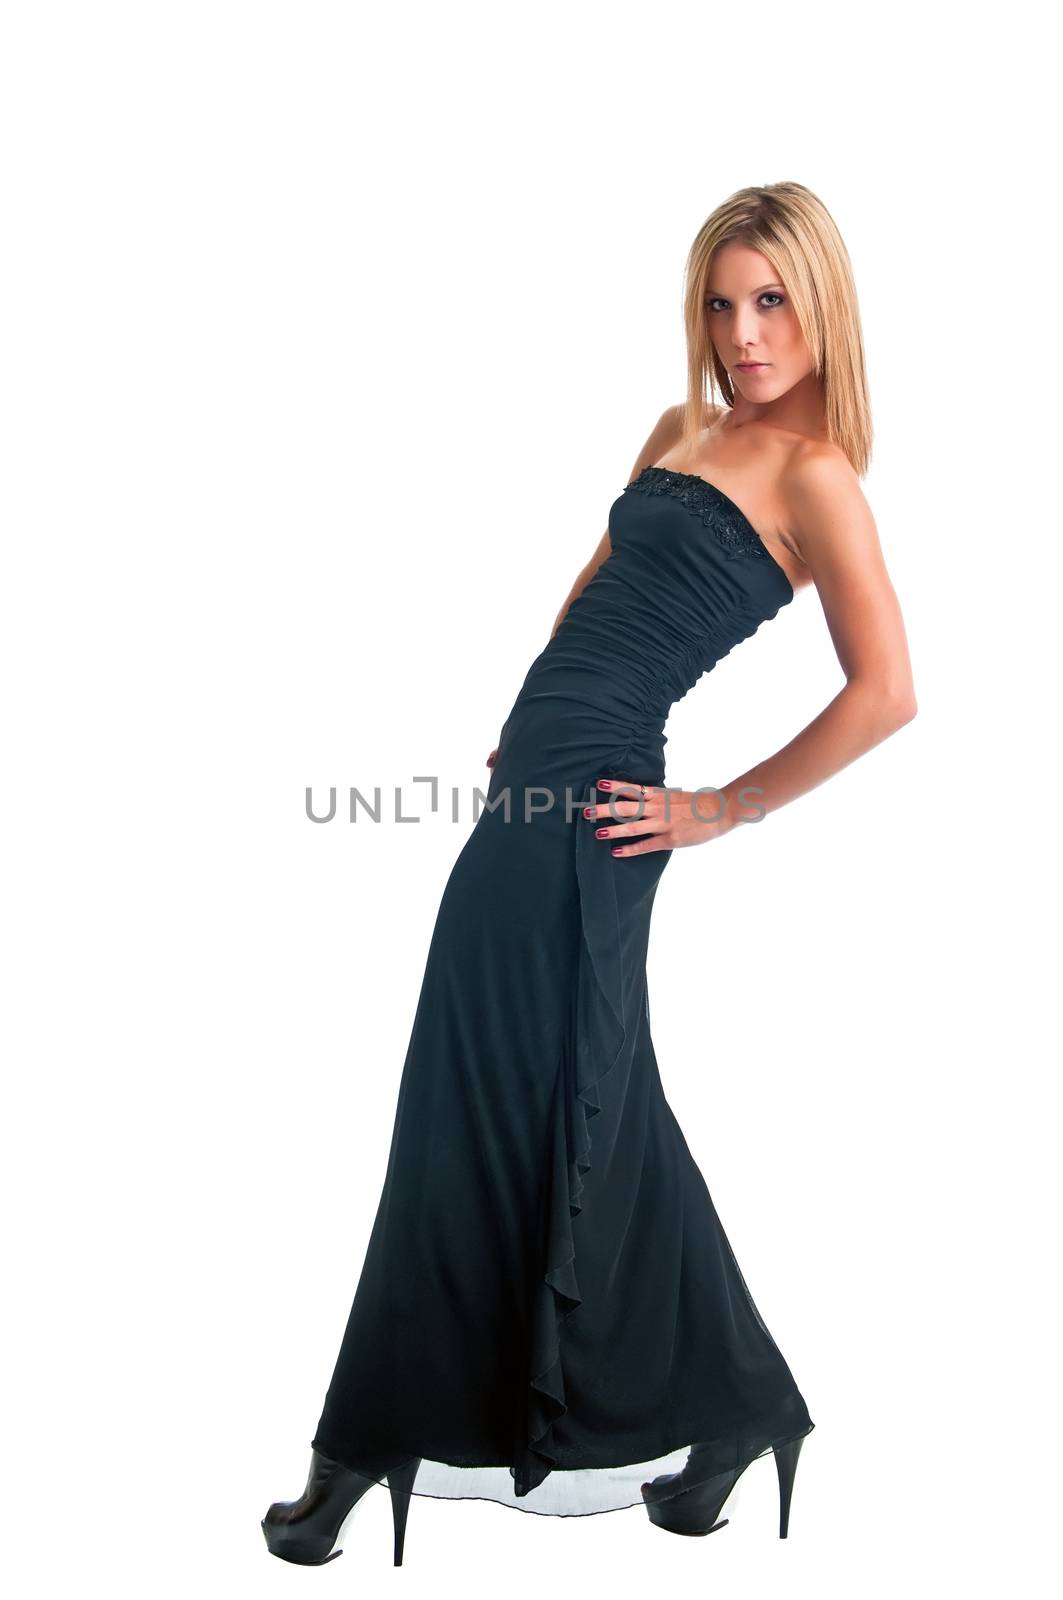 Pretty blonde confidently showing her close fitting gown against a white background